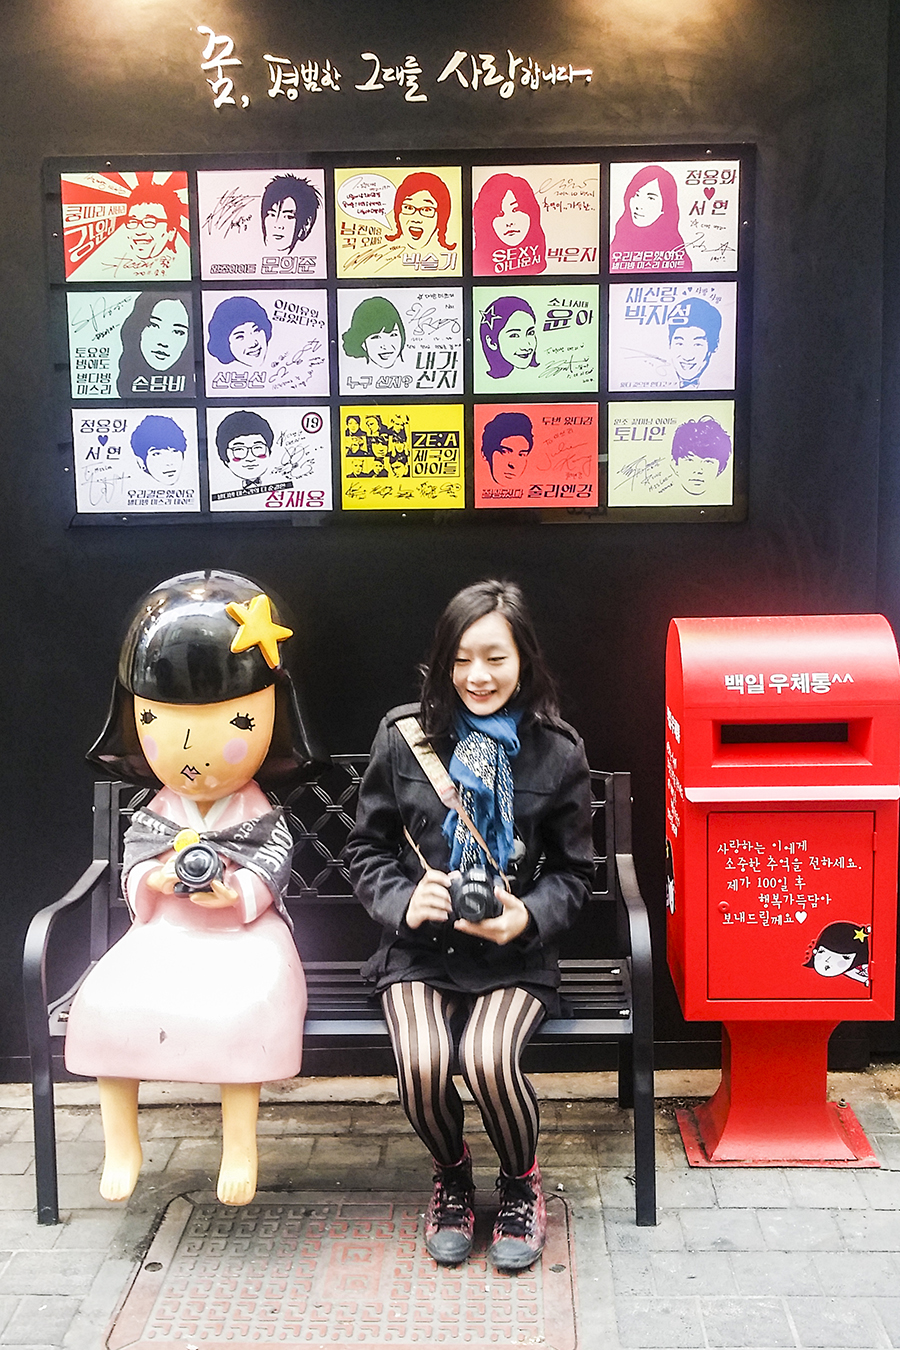 Taking a portrait with a cute statue outside Miss Lee Cafe in Myeongdong, Seoul, South Korea.